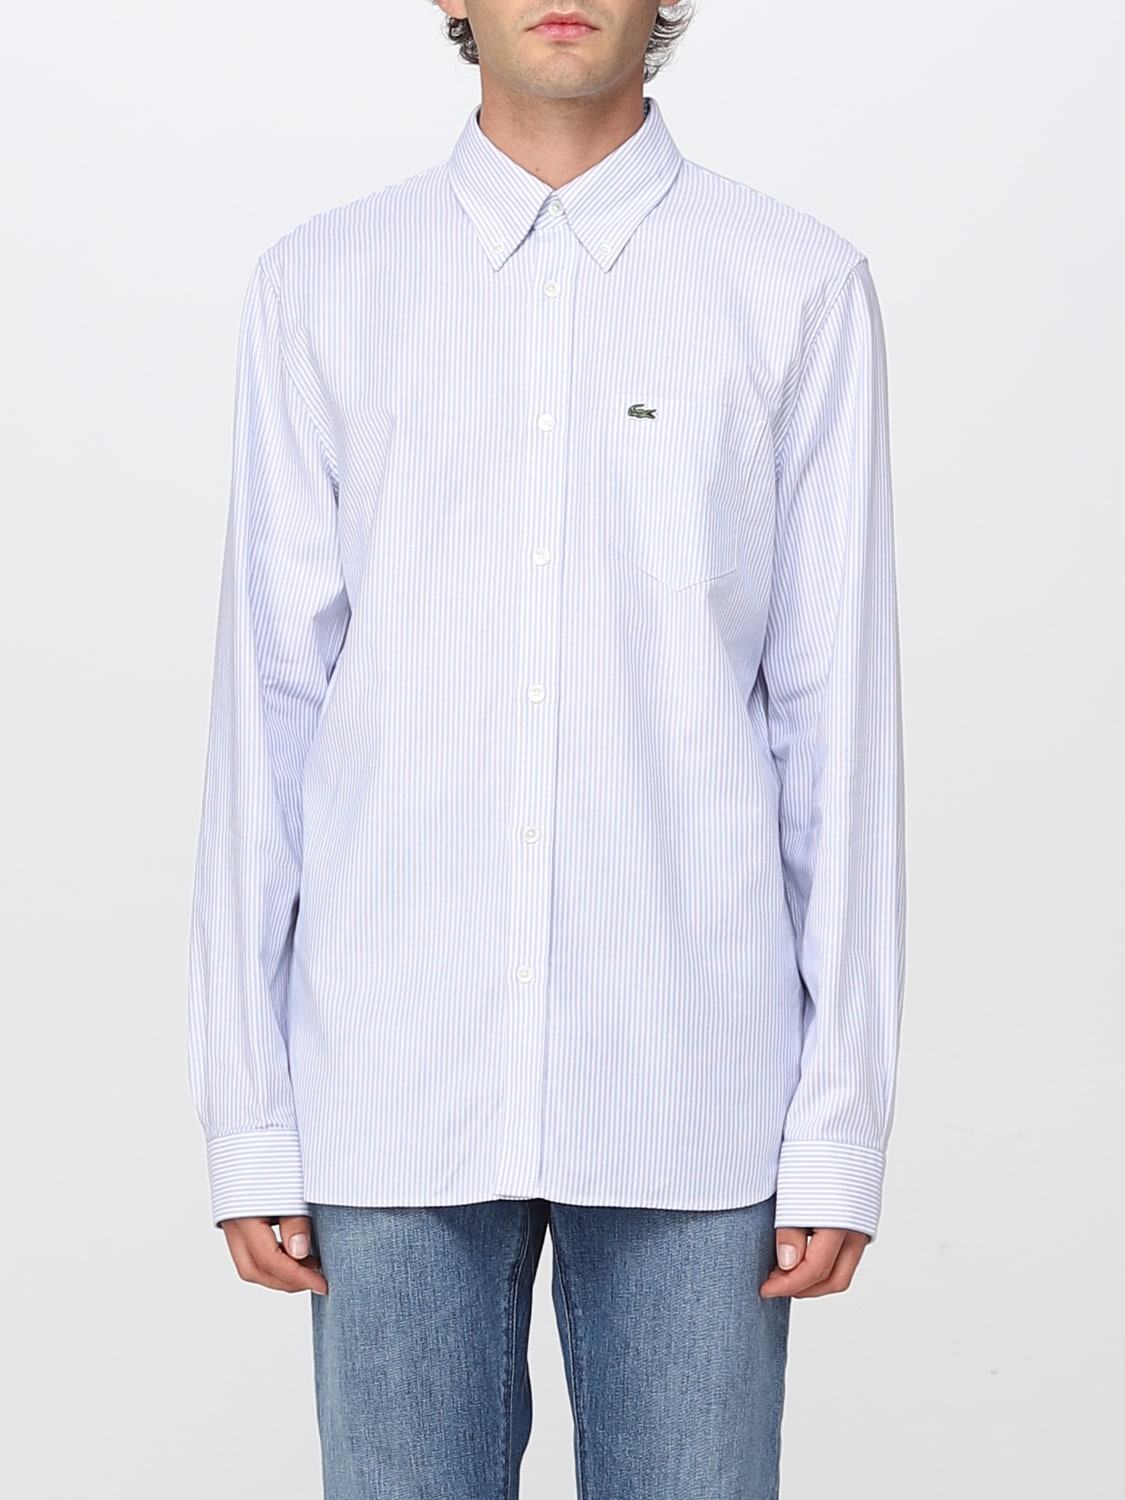 Iniciar sesión Aplastar Gimnasia Lacoste Outlet: shirt for man - Sky Blue | Lacoste shirt CH2945 online on  GIGLIO.COM